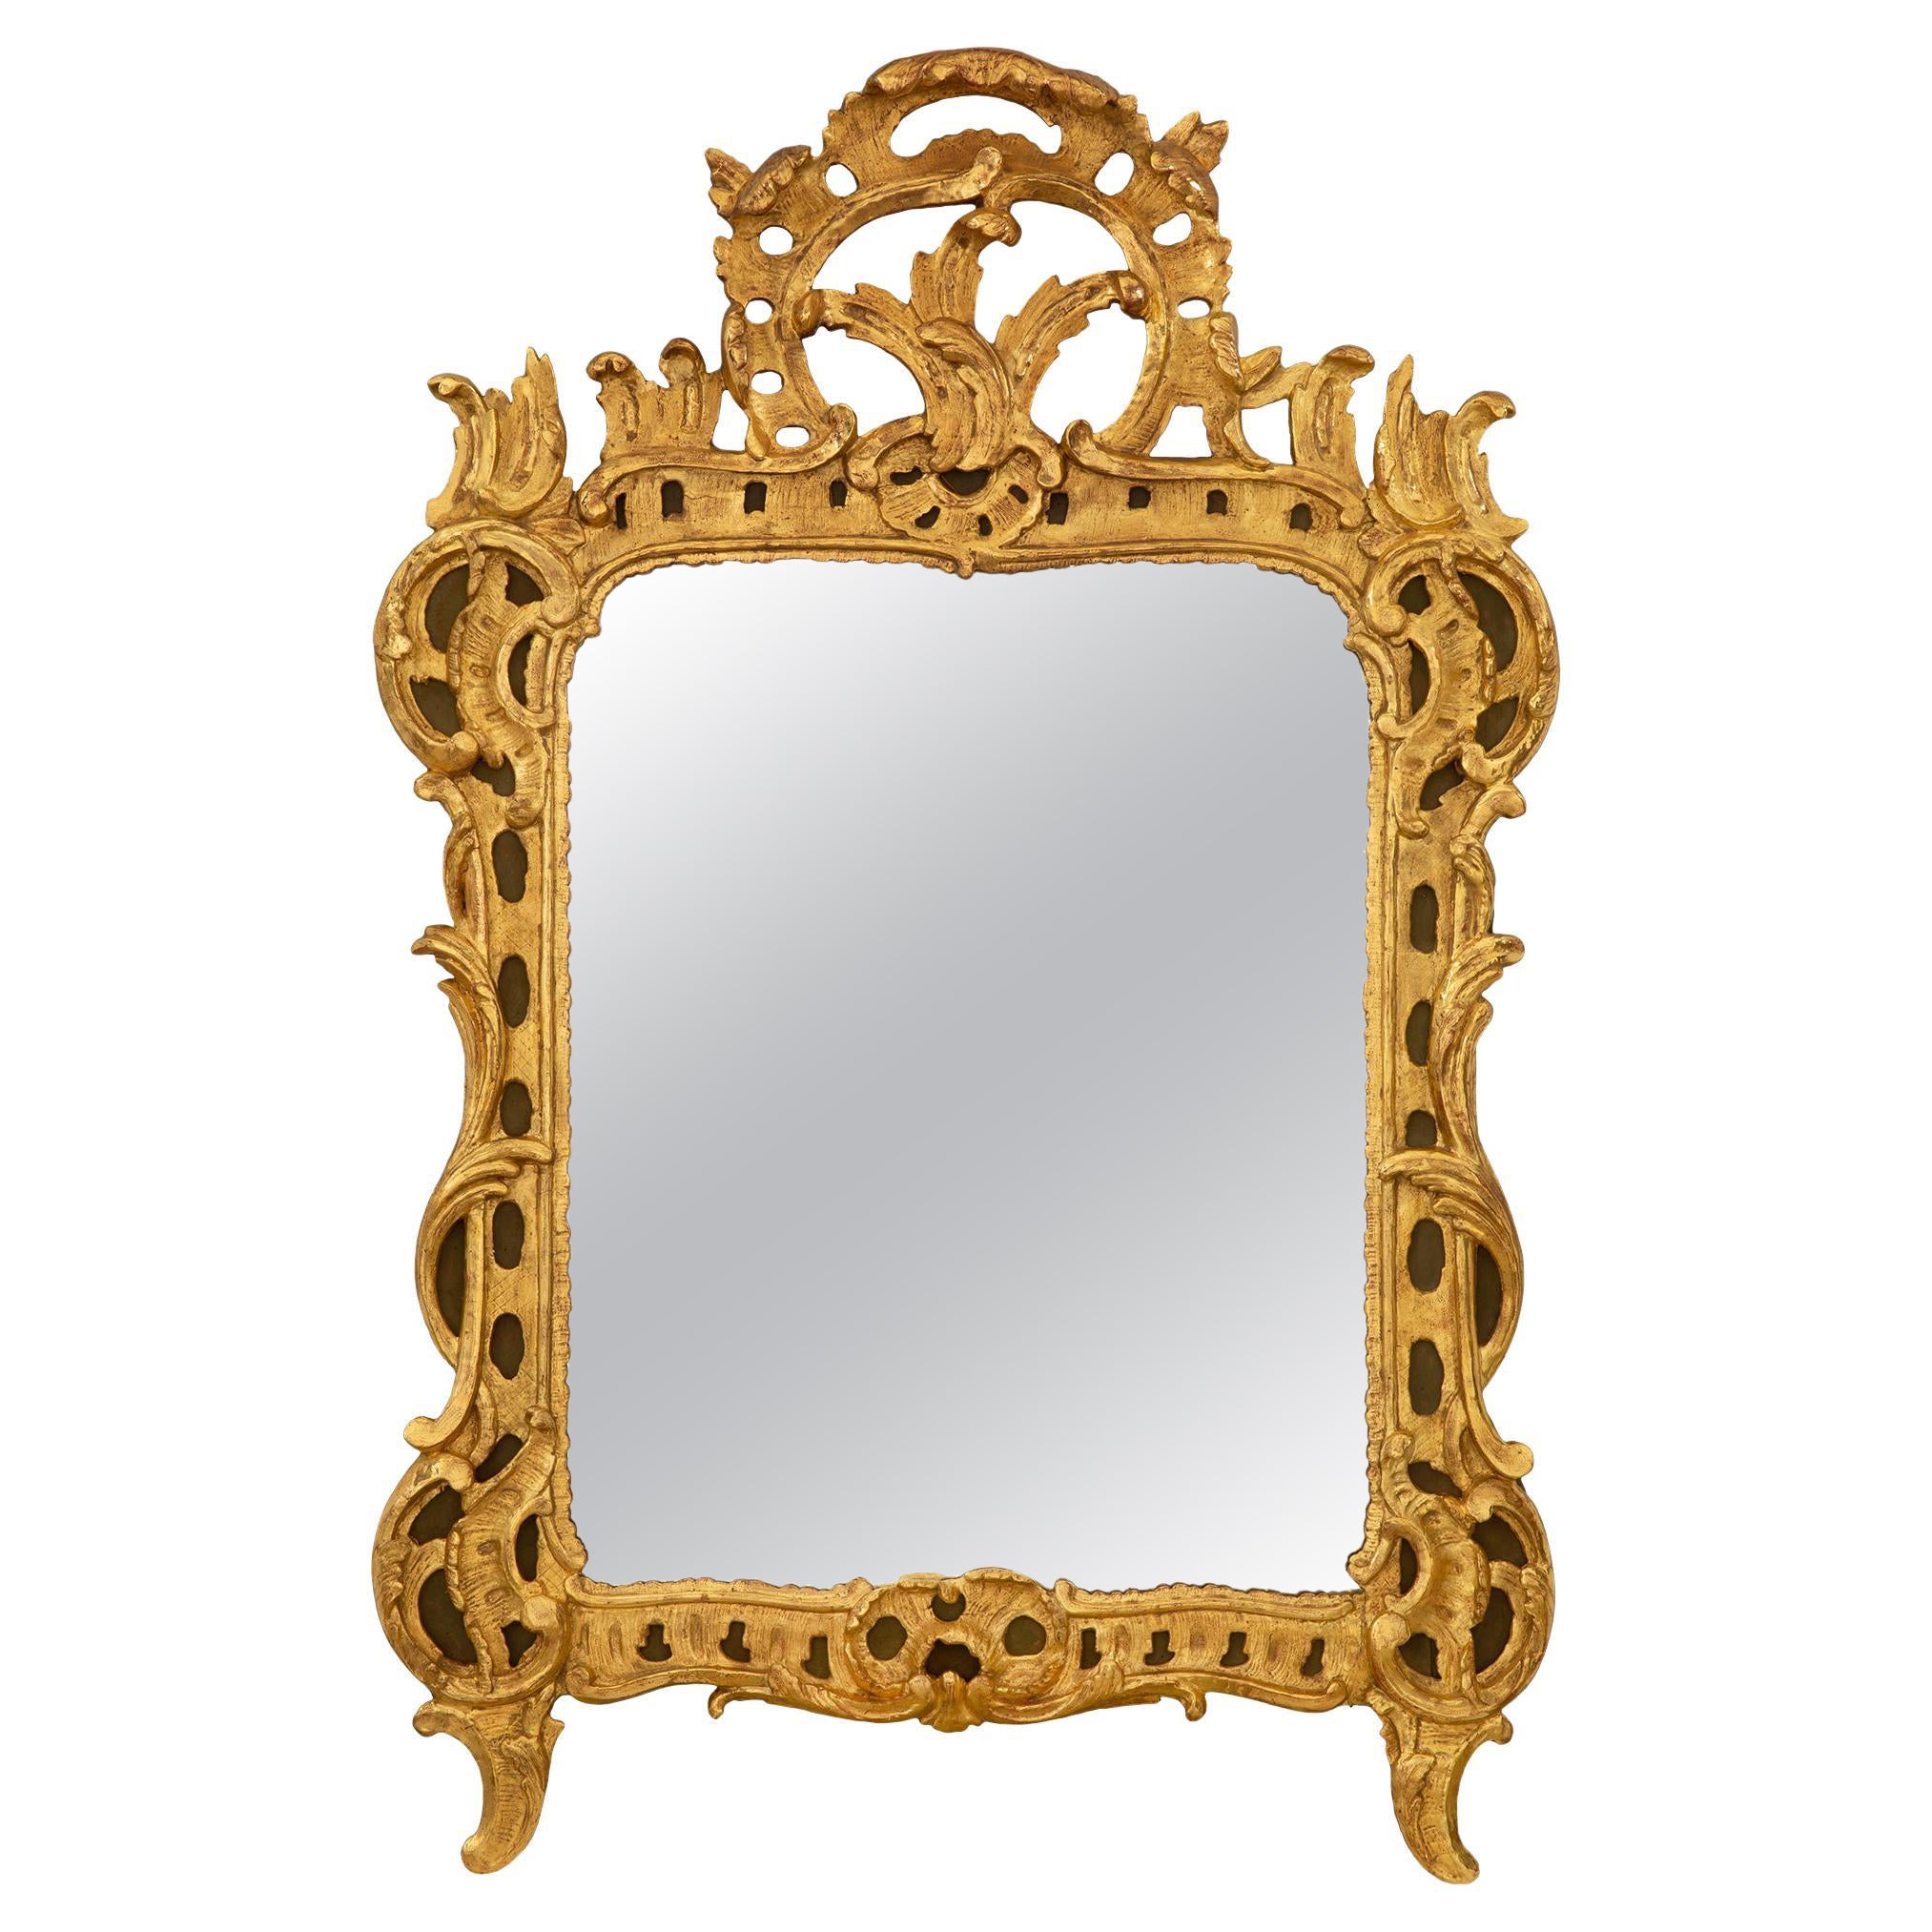 French 18th Century Régence Period Giltwood Mirror For Sale